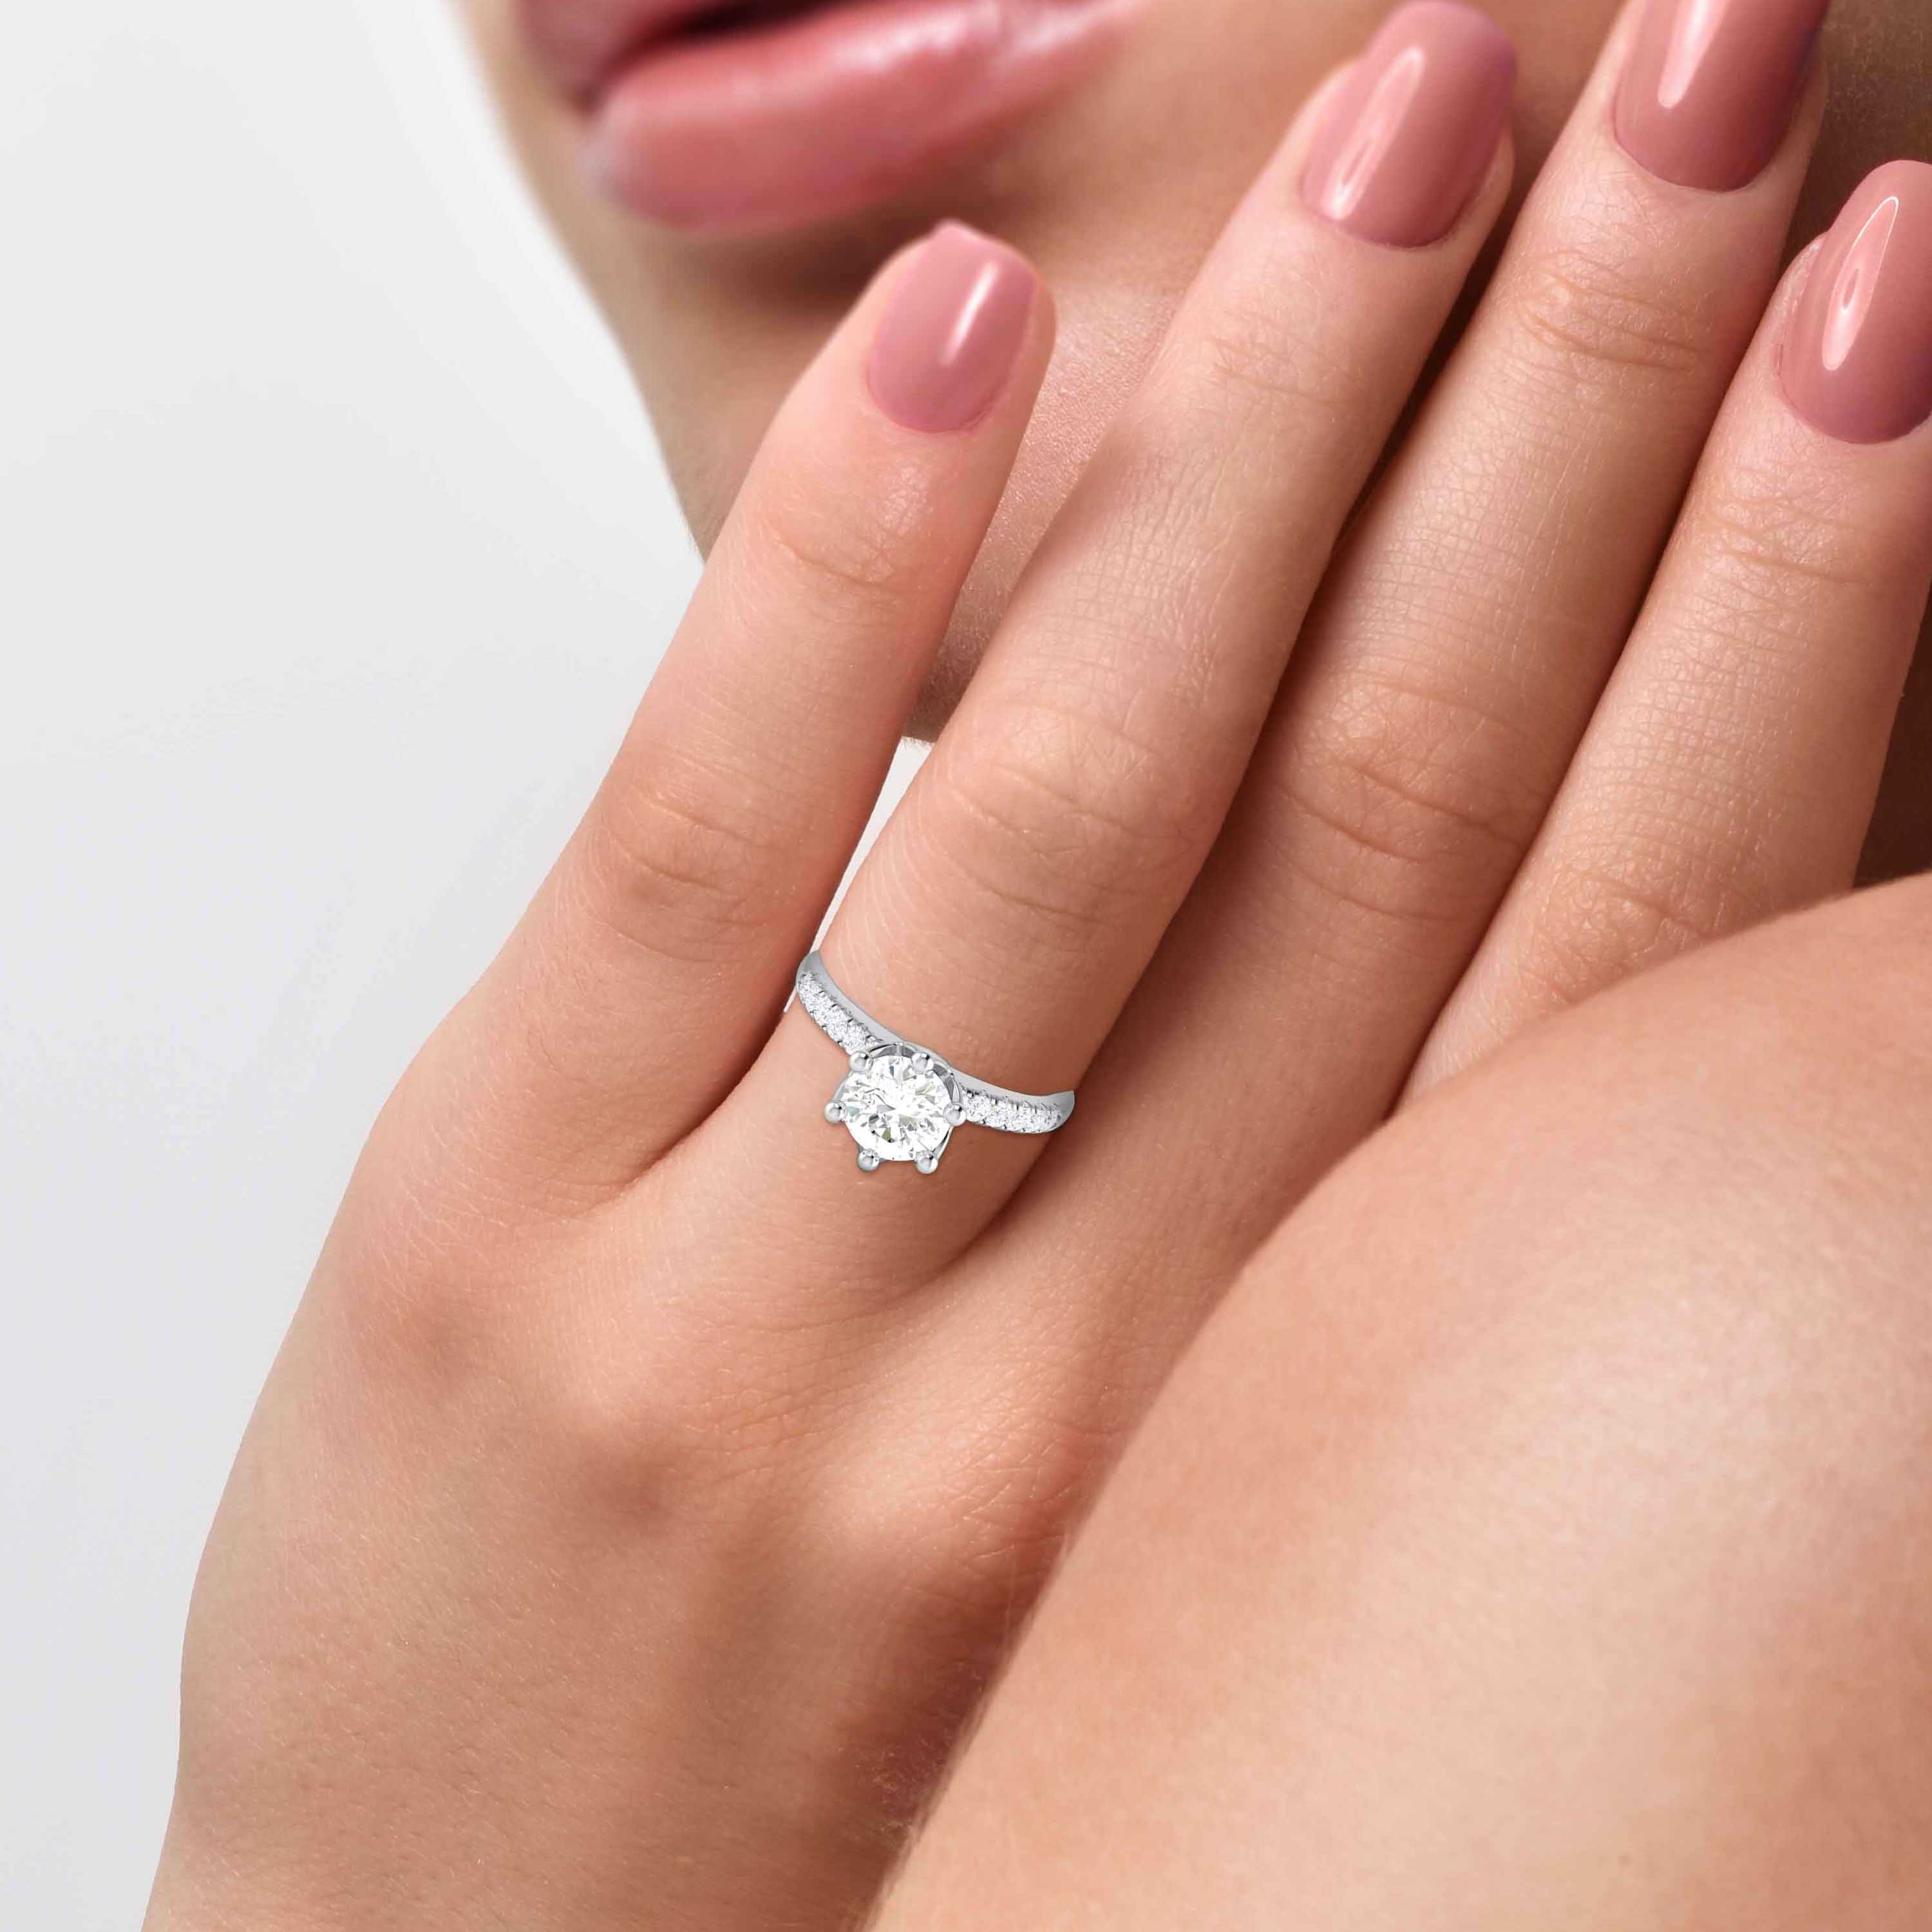 Buy a 1.5 Carat Diamond Ring? (Read Our Guide First) – All Diamond